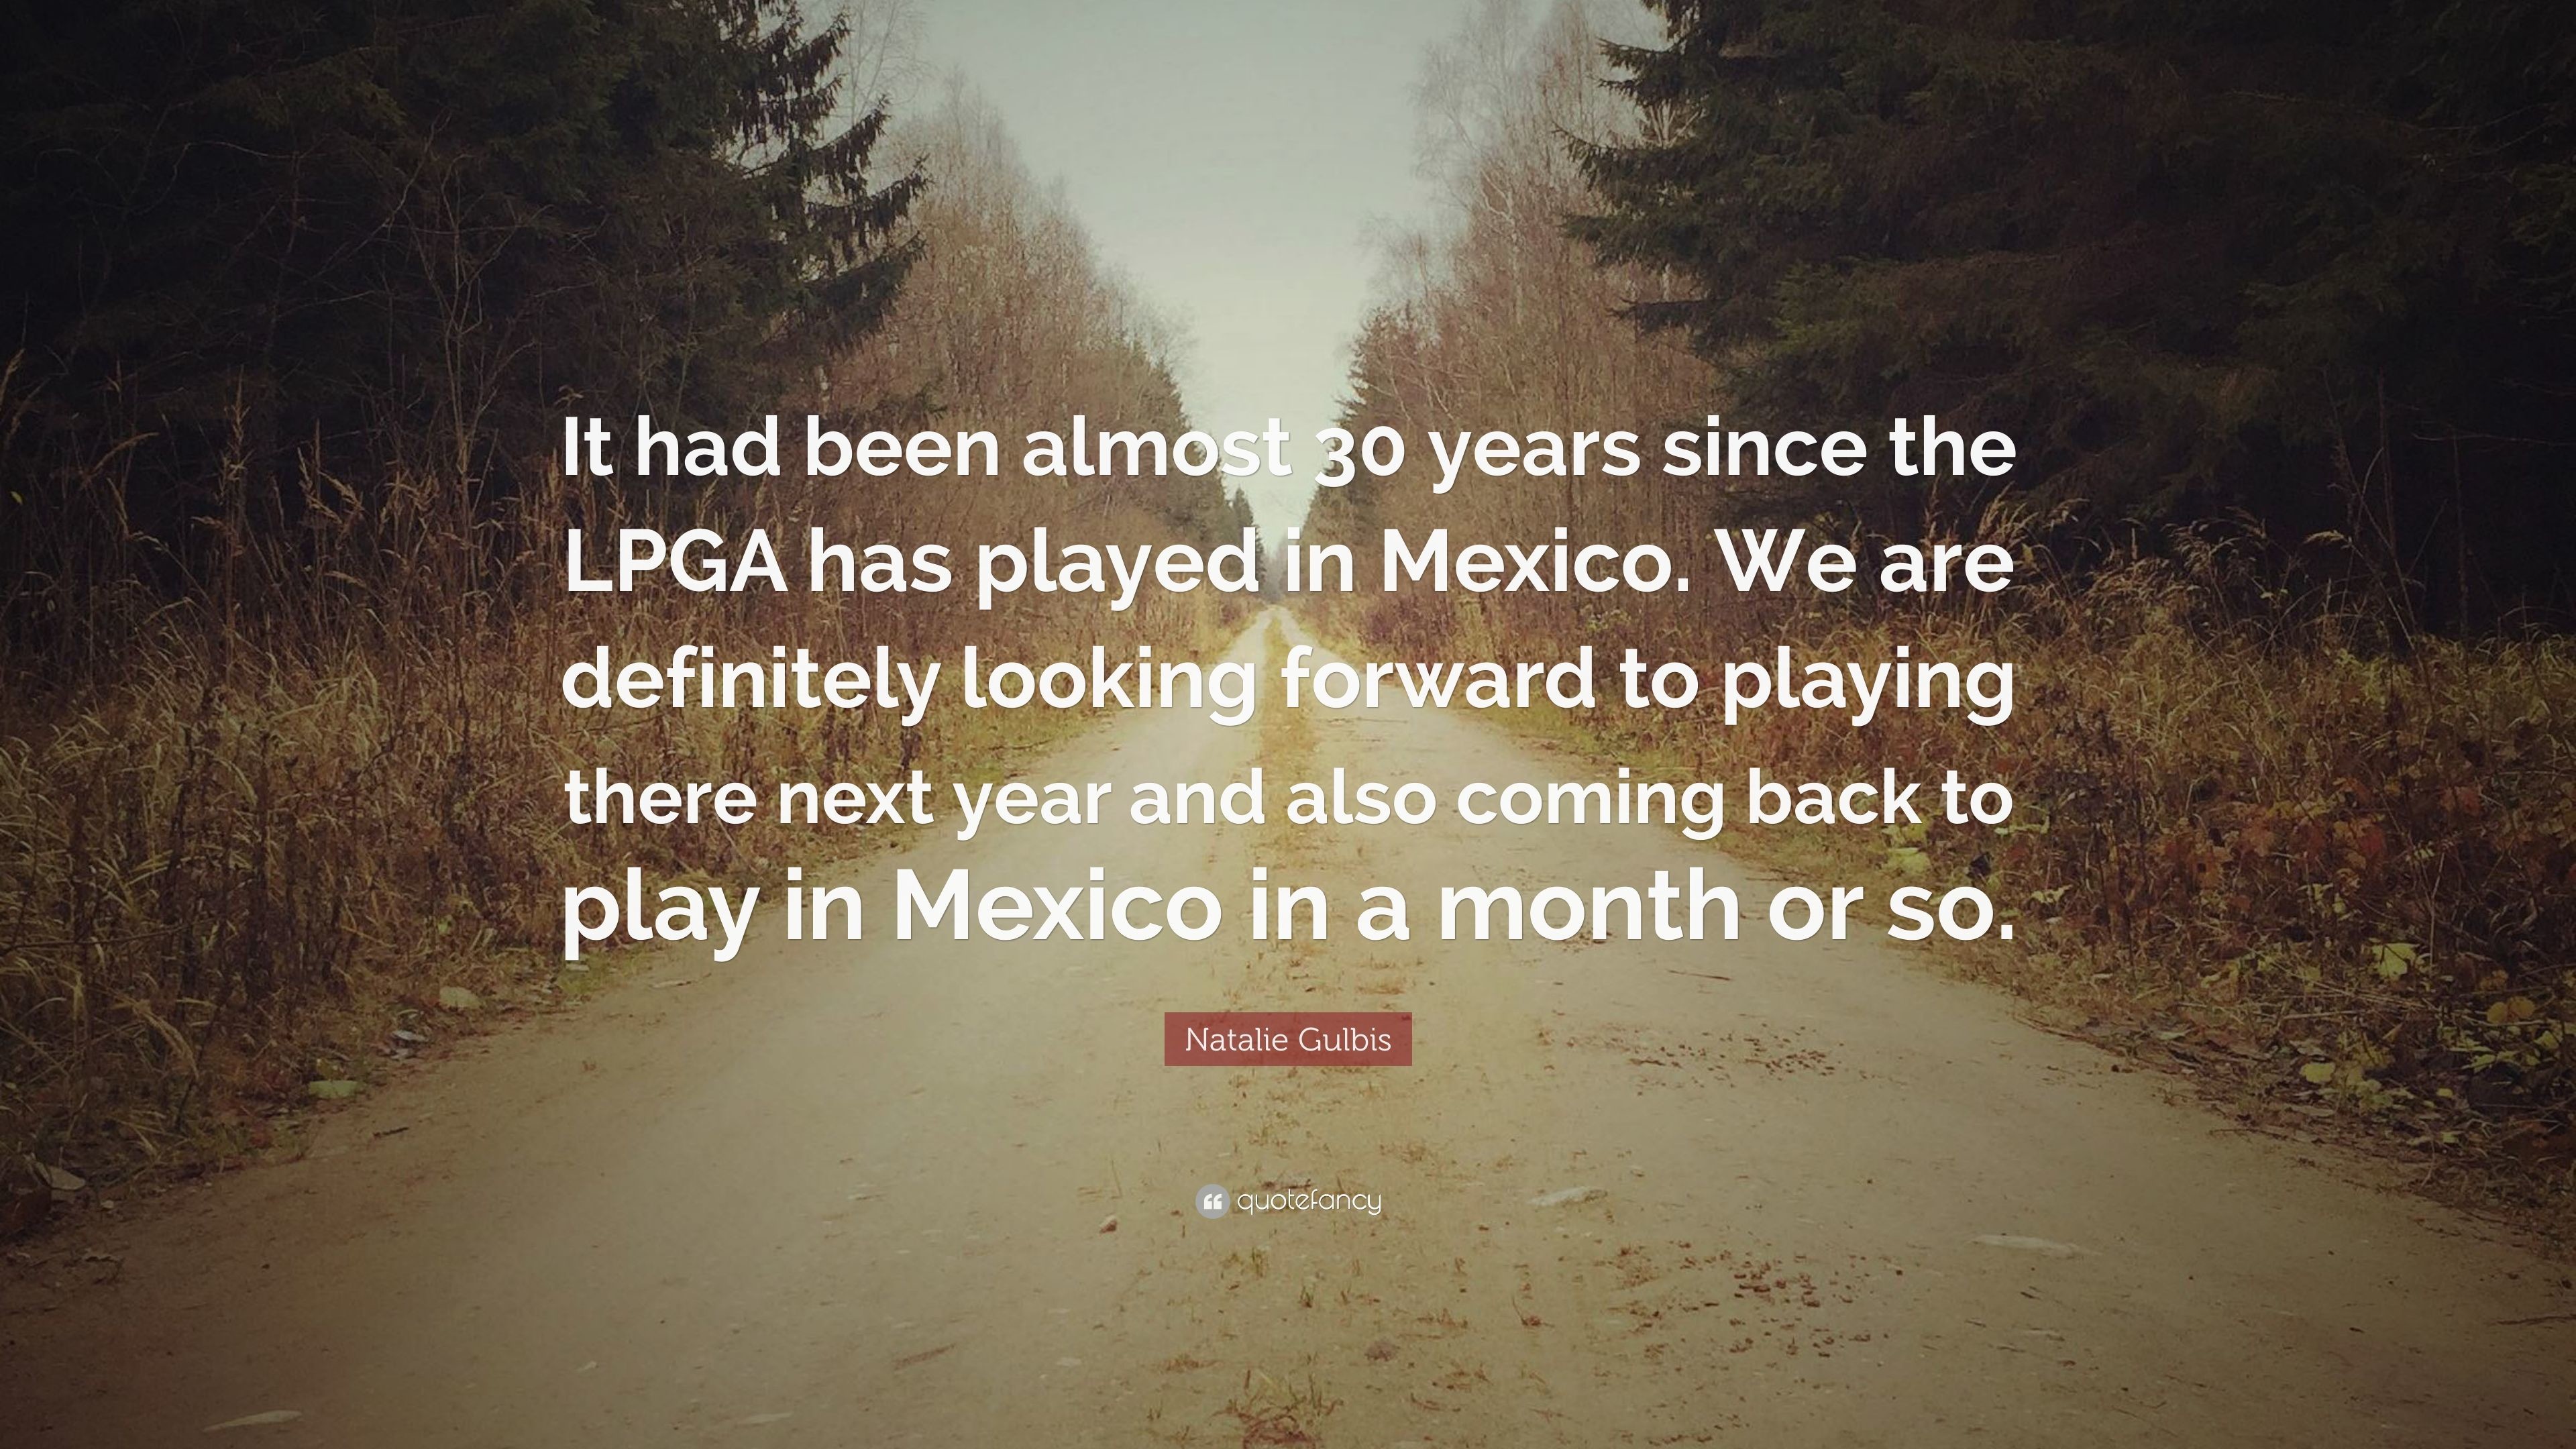 3840x2160 Natalie Gulbis Quote: “It had been almost 30 years since the LPGA has played